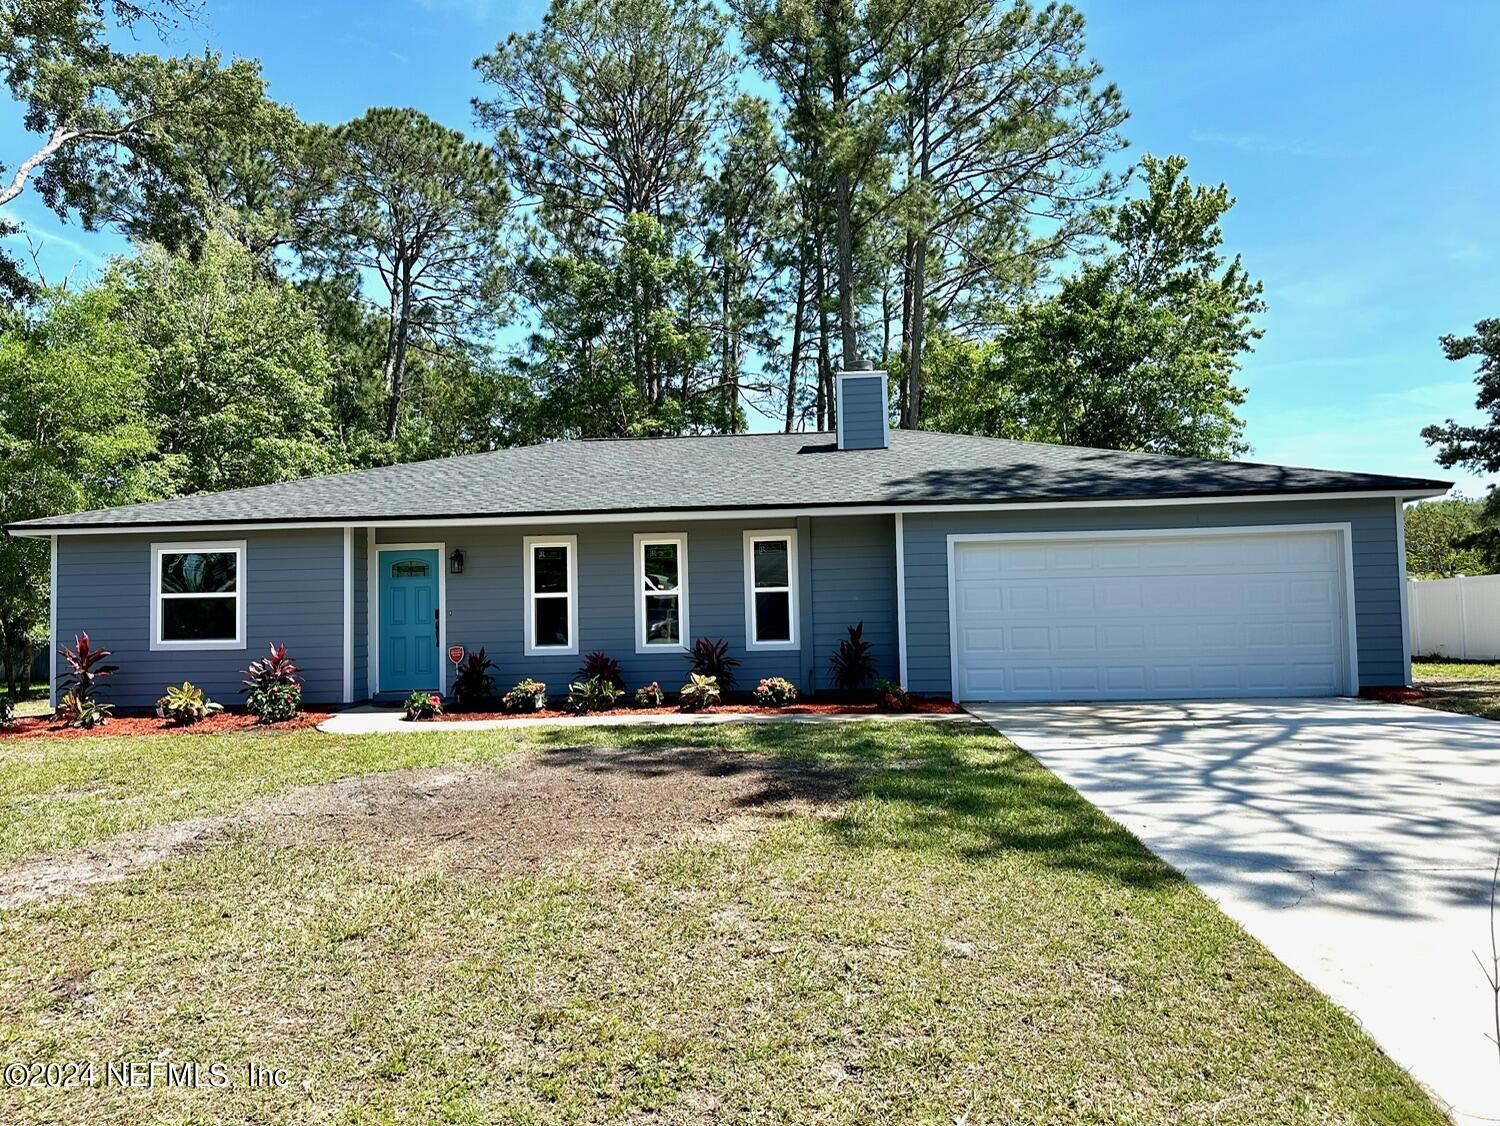 Middleburg, FL home for sale located at 1997 Calusa Trail, Middleburg, FL 32068